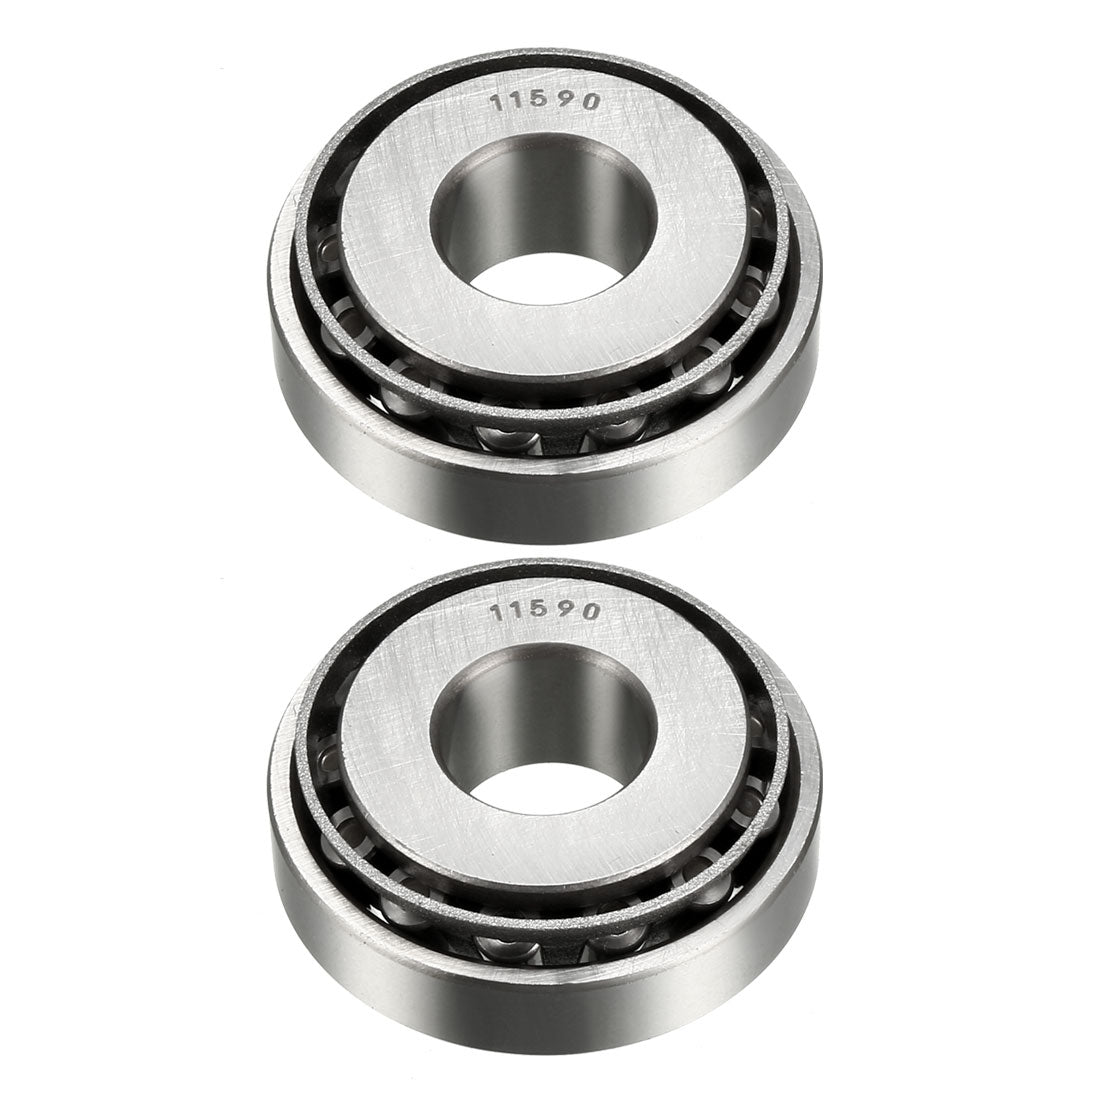 uxcell Uxcell 11590/11520 Tapered Roller Bearing Cone and Cup Set 0.625" Bore 1.688" O.D. 2pcs